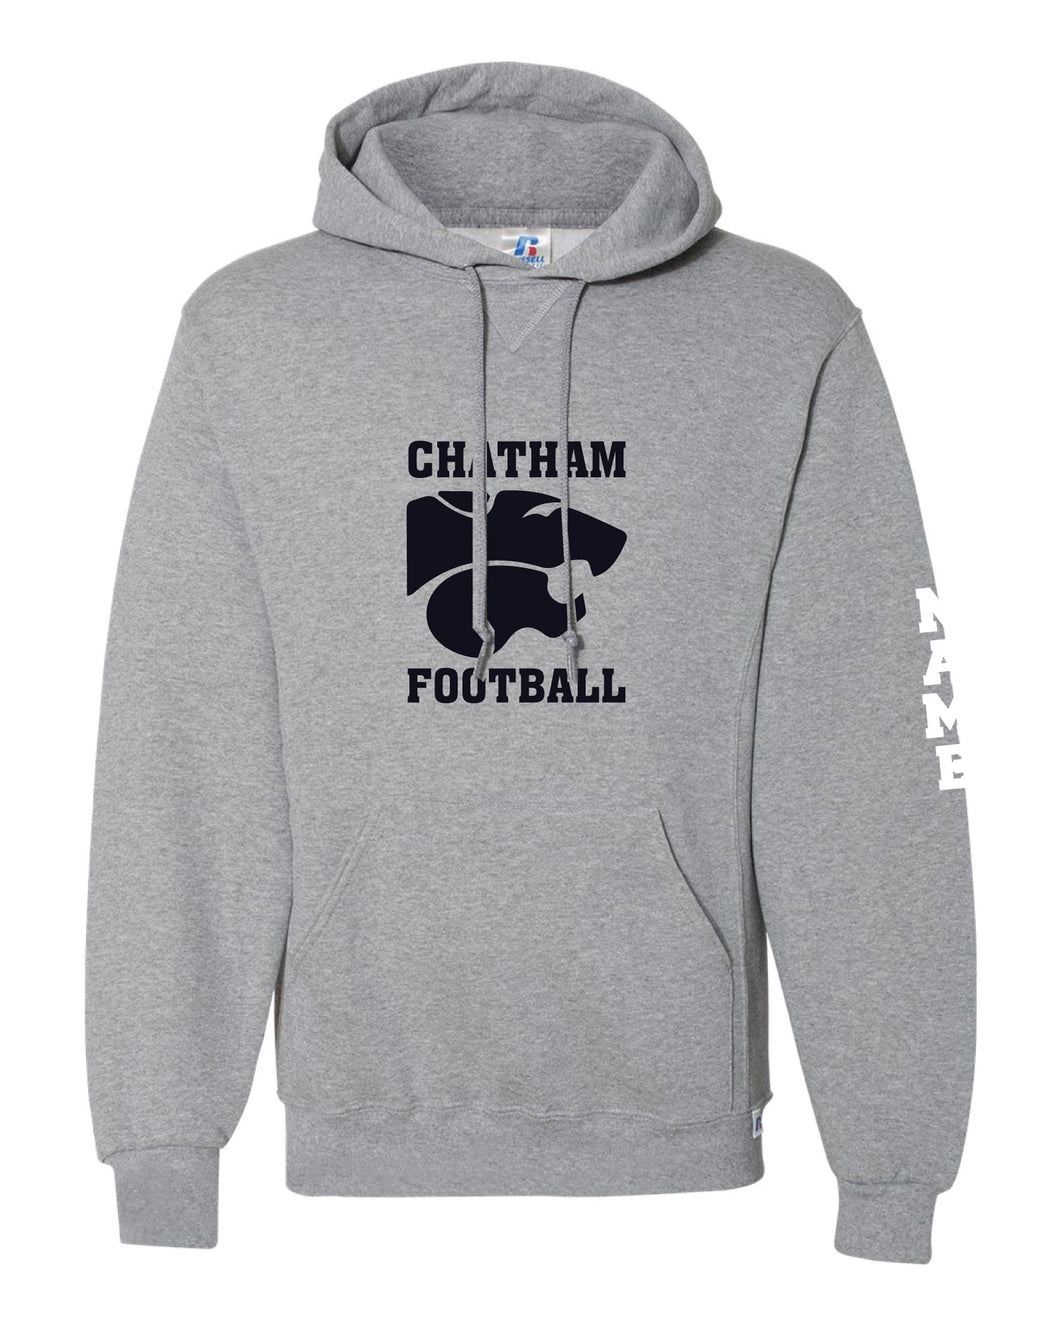 Chatham Football Russell Athletic Cotton Hoodie - Gray